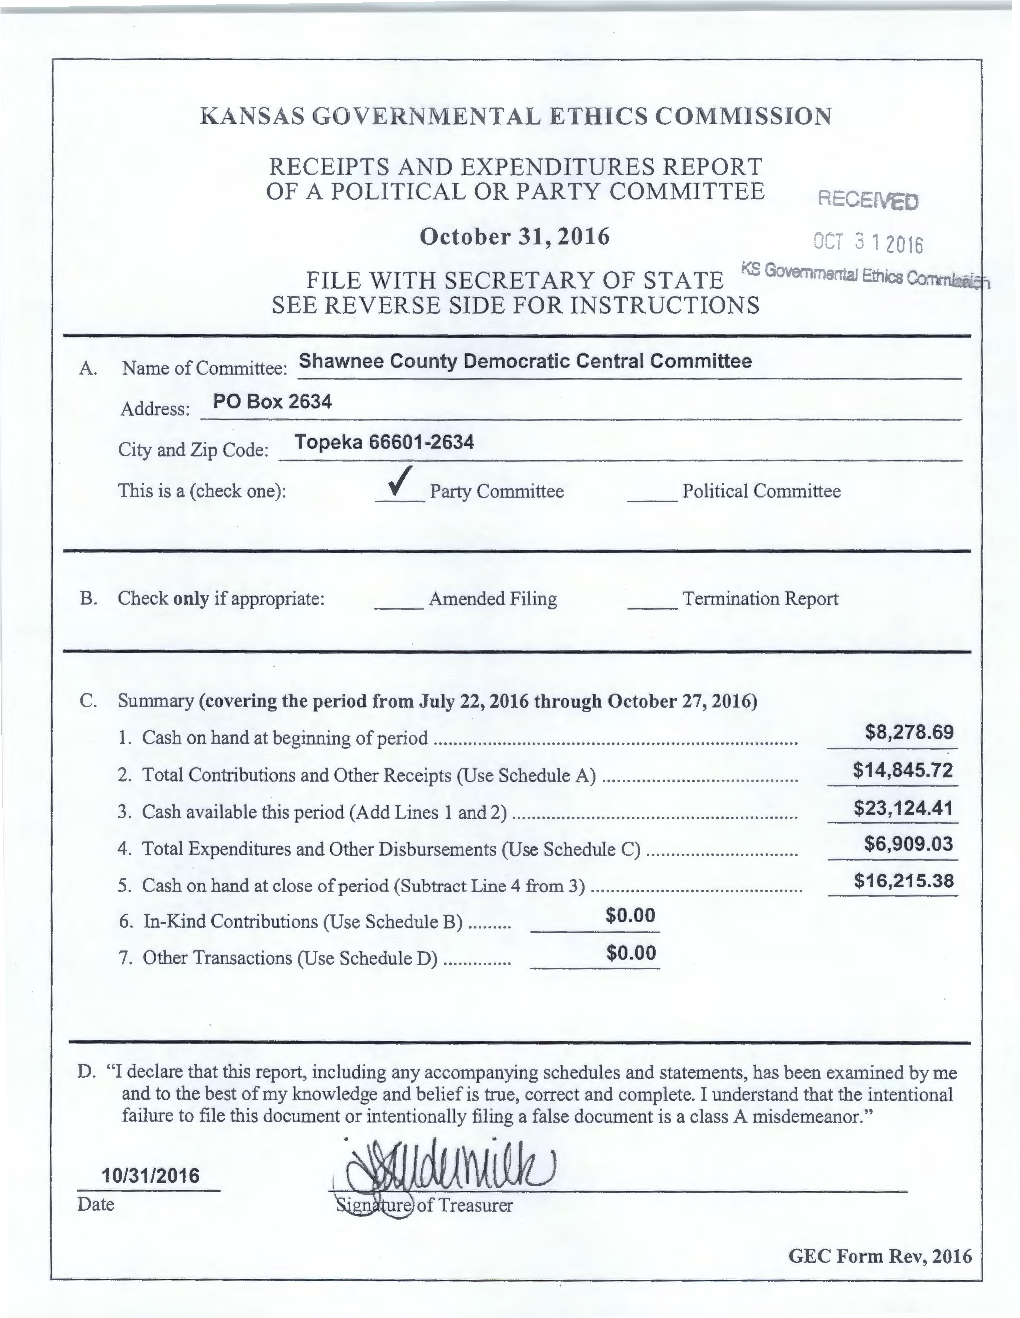 KANSAS GOVERNMENTAL ETHICS COMMISSION RECEIPTS and EXPENDITURES REPORT of a POLITICAL OR PARTY COMMITTEE October 31, 2016 FILE W